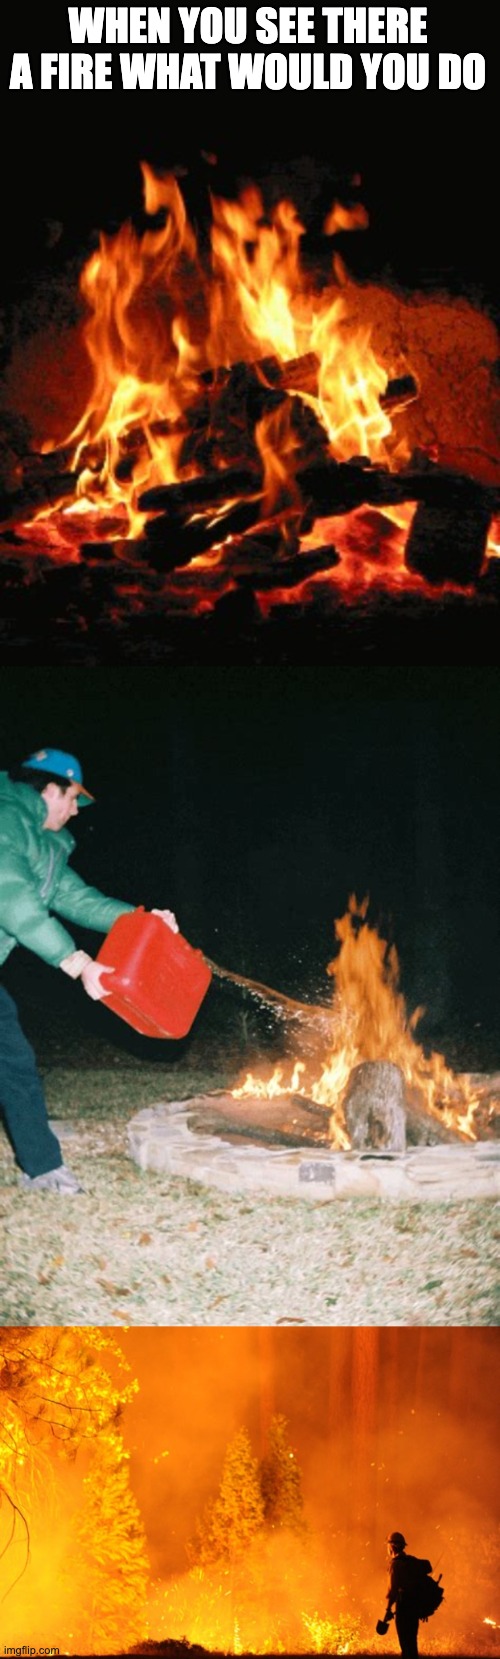 Well???? | WHEN YOU SEE THERE A FIRE WHAT WOULD YOU DO | image tagged in small fire,guy pouring gasoline into fire,wildfire | made w/ Imgflip meme maker